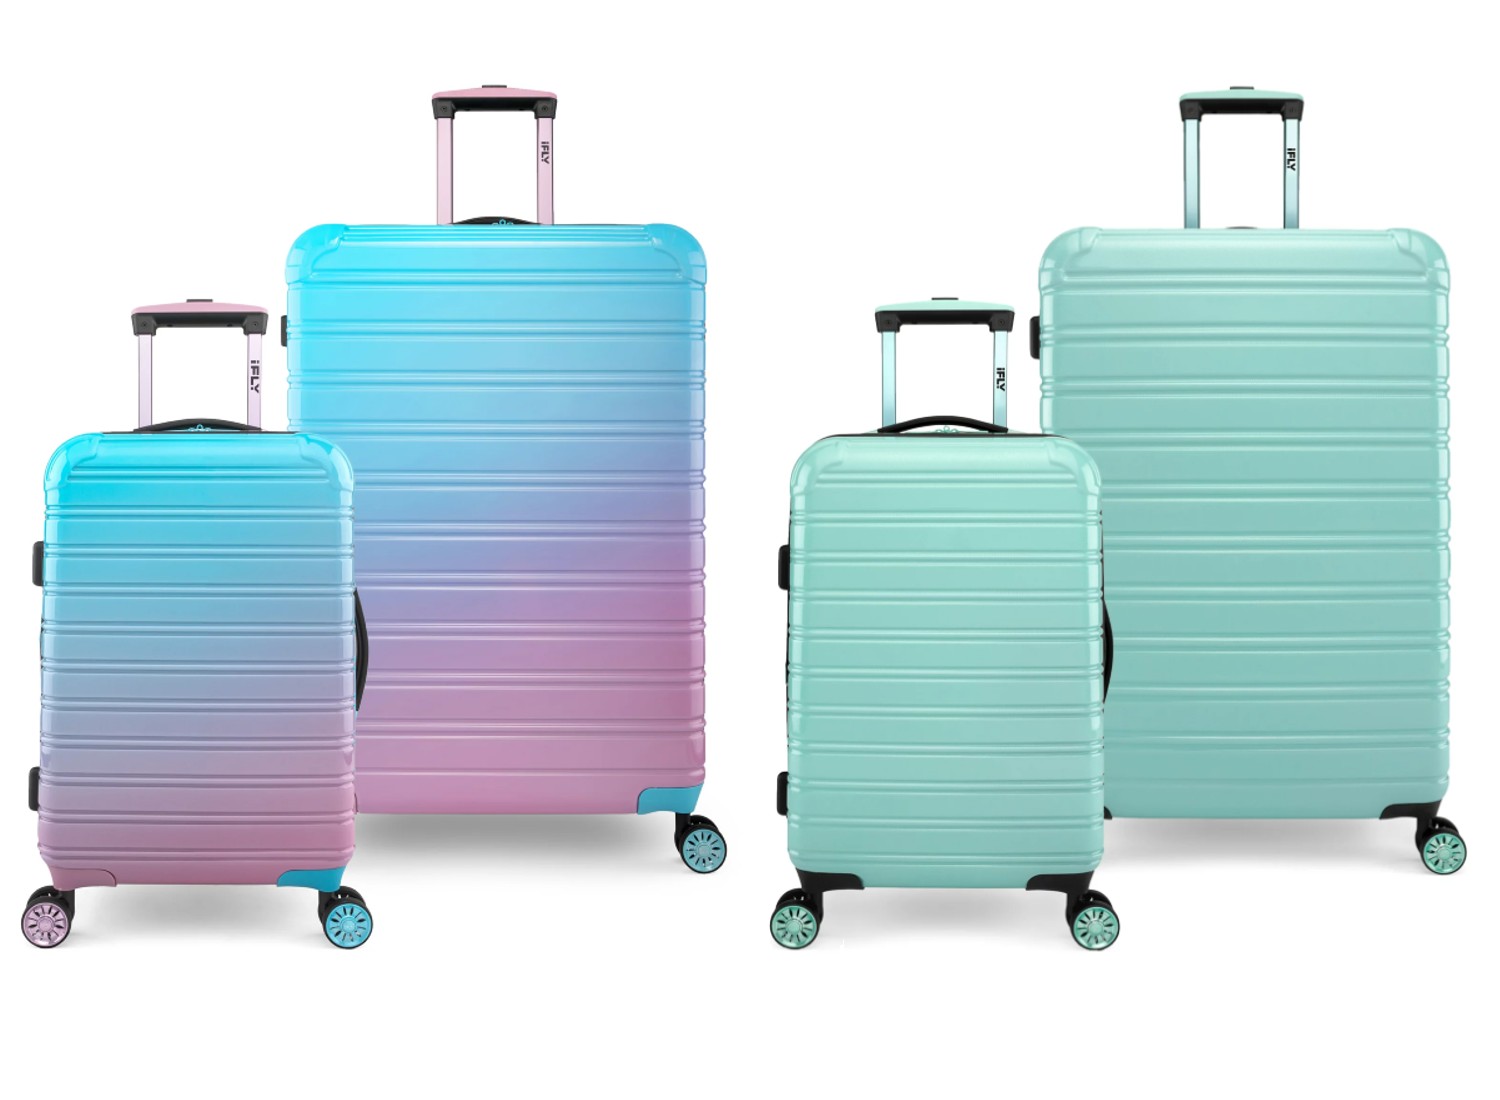 iFly Luggage Sets